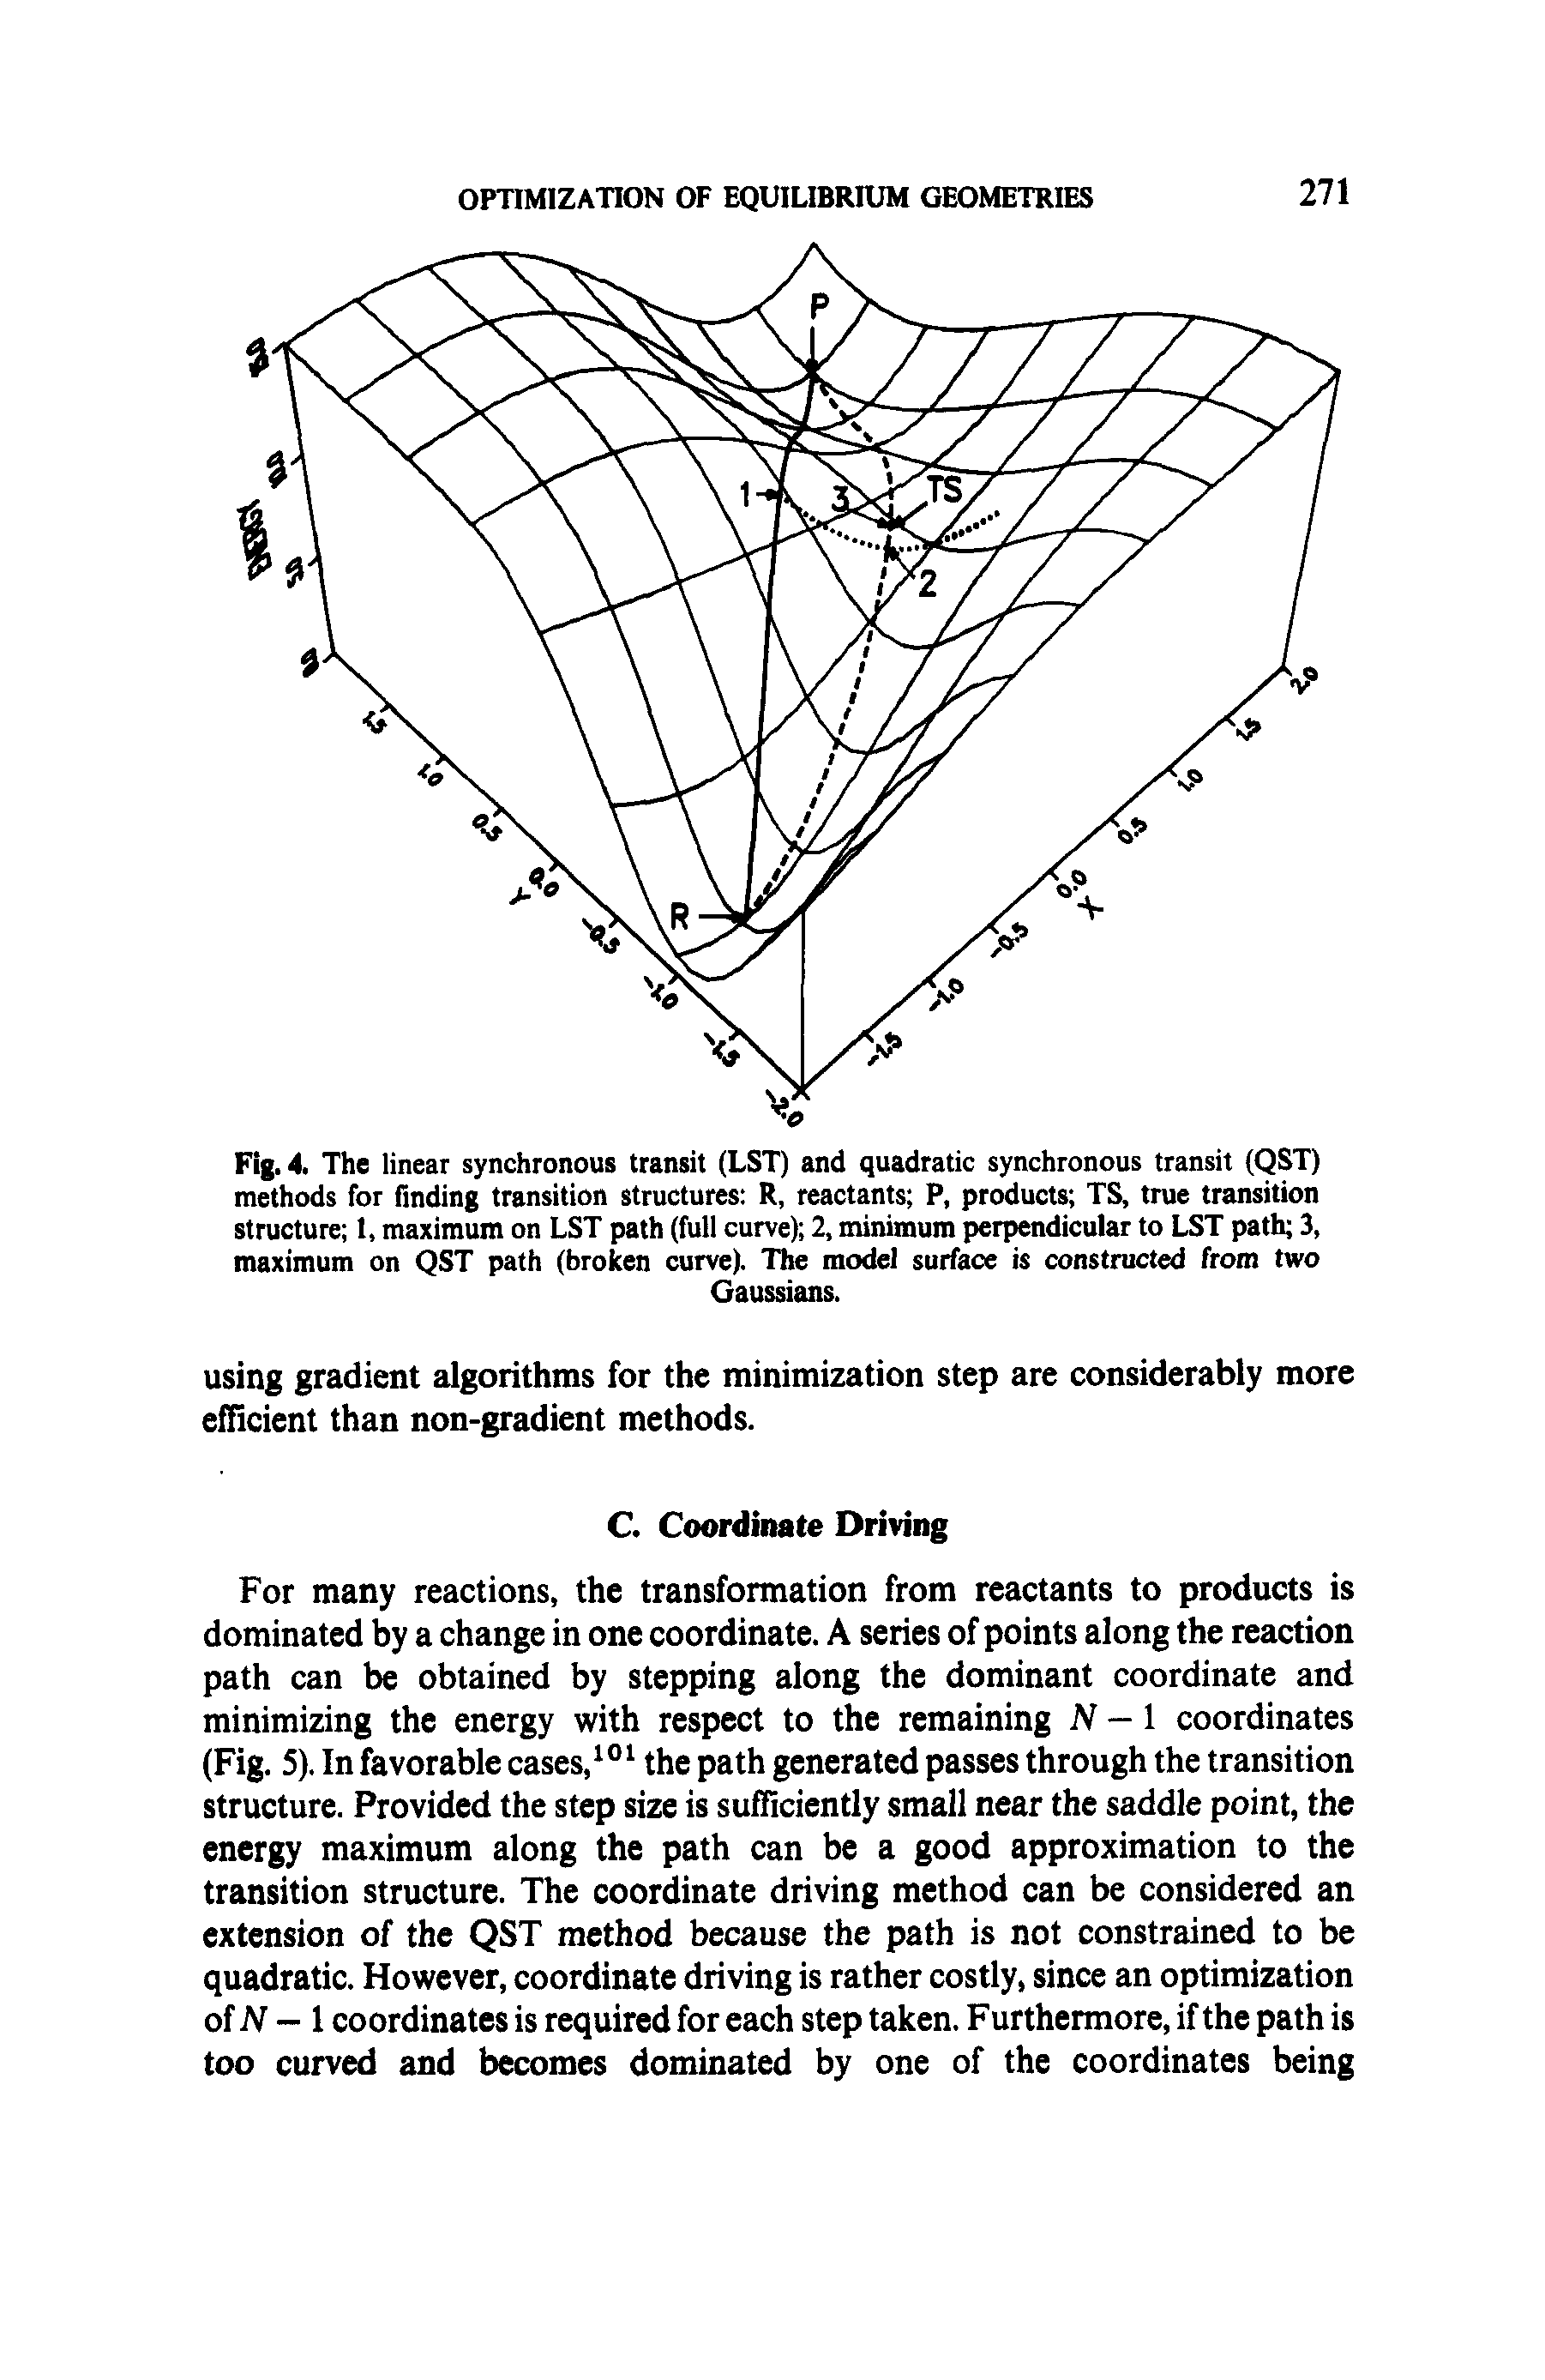 Fig. 4. The linear synchronous transit (LST) and quadratic synchronous transit (QST) methods for finding transition structures R, reactants P, prc ucts TS, true transition structure 1, maximum on LST path (full curveV, 2, minimum perpendicular to LST path 3, maximum on QST path (broken curve). The model surface is constructed from two...